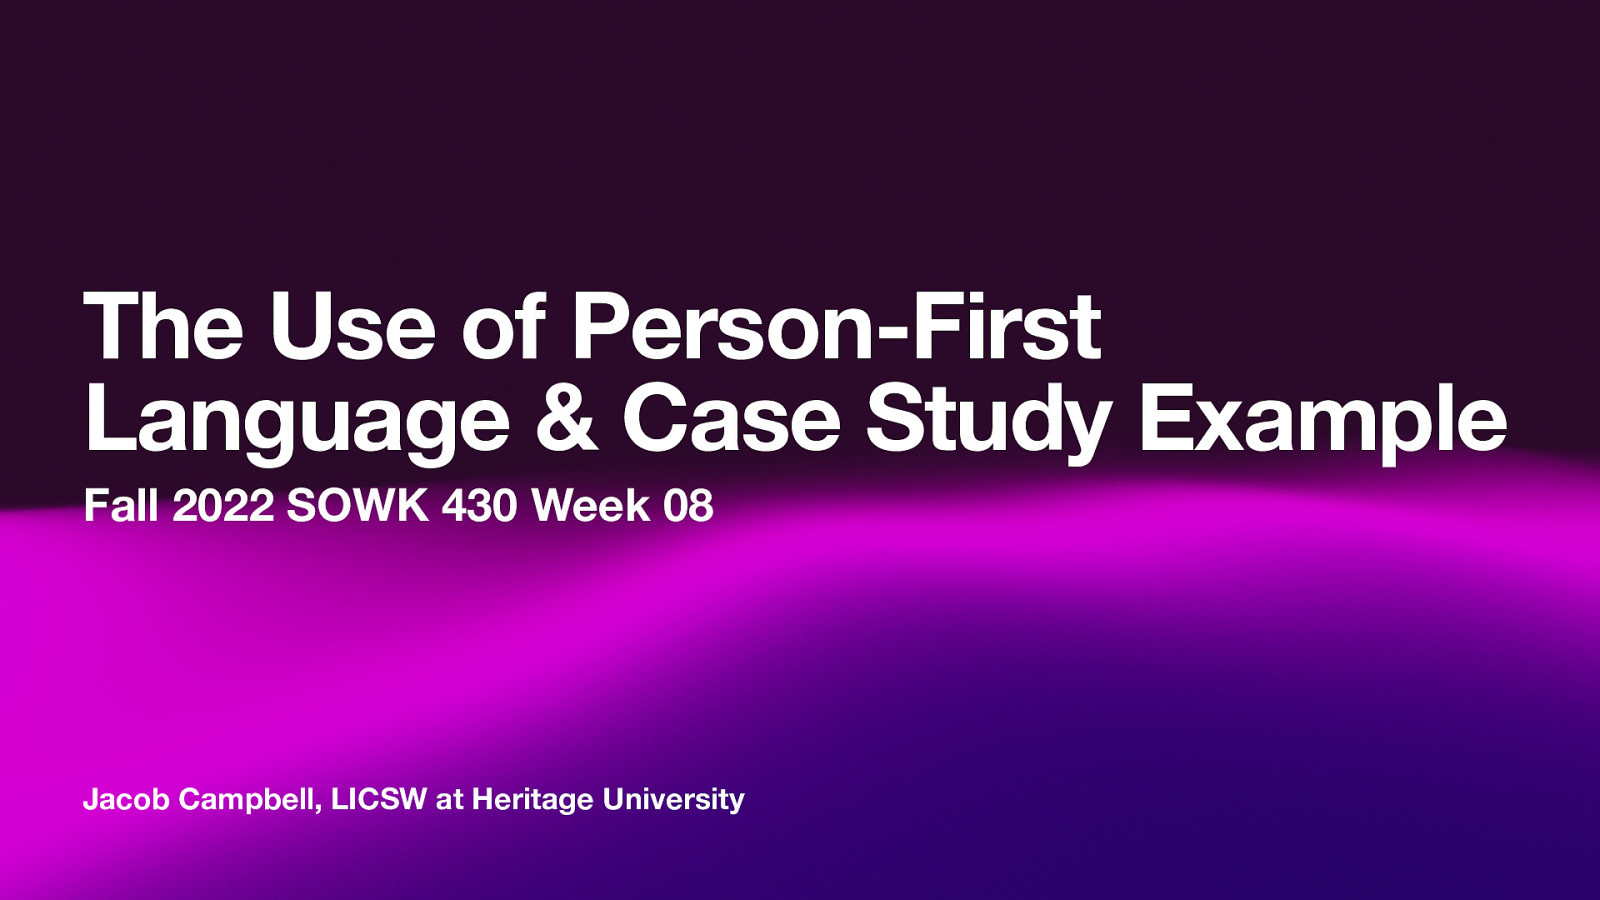 Fall 2022 SOWK 430 Week 08: The Use of Person-First Language and Case Study Example